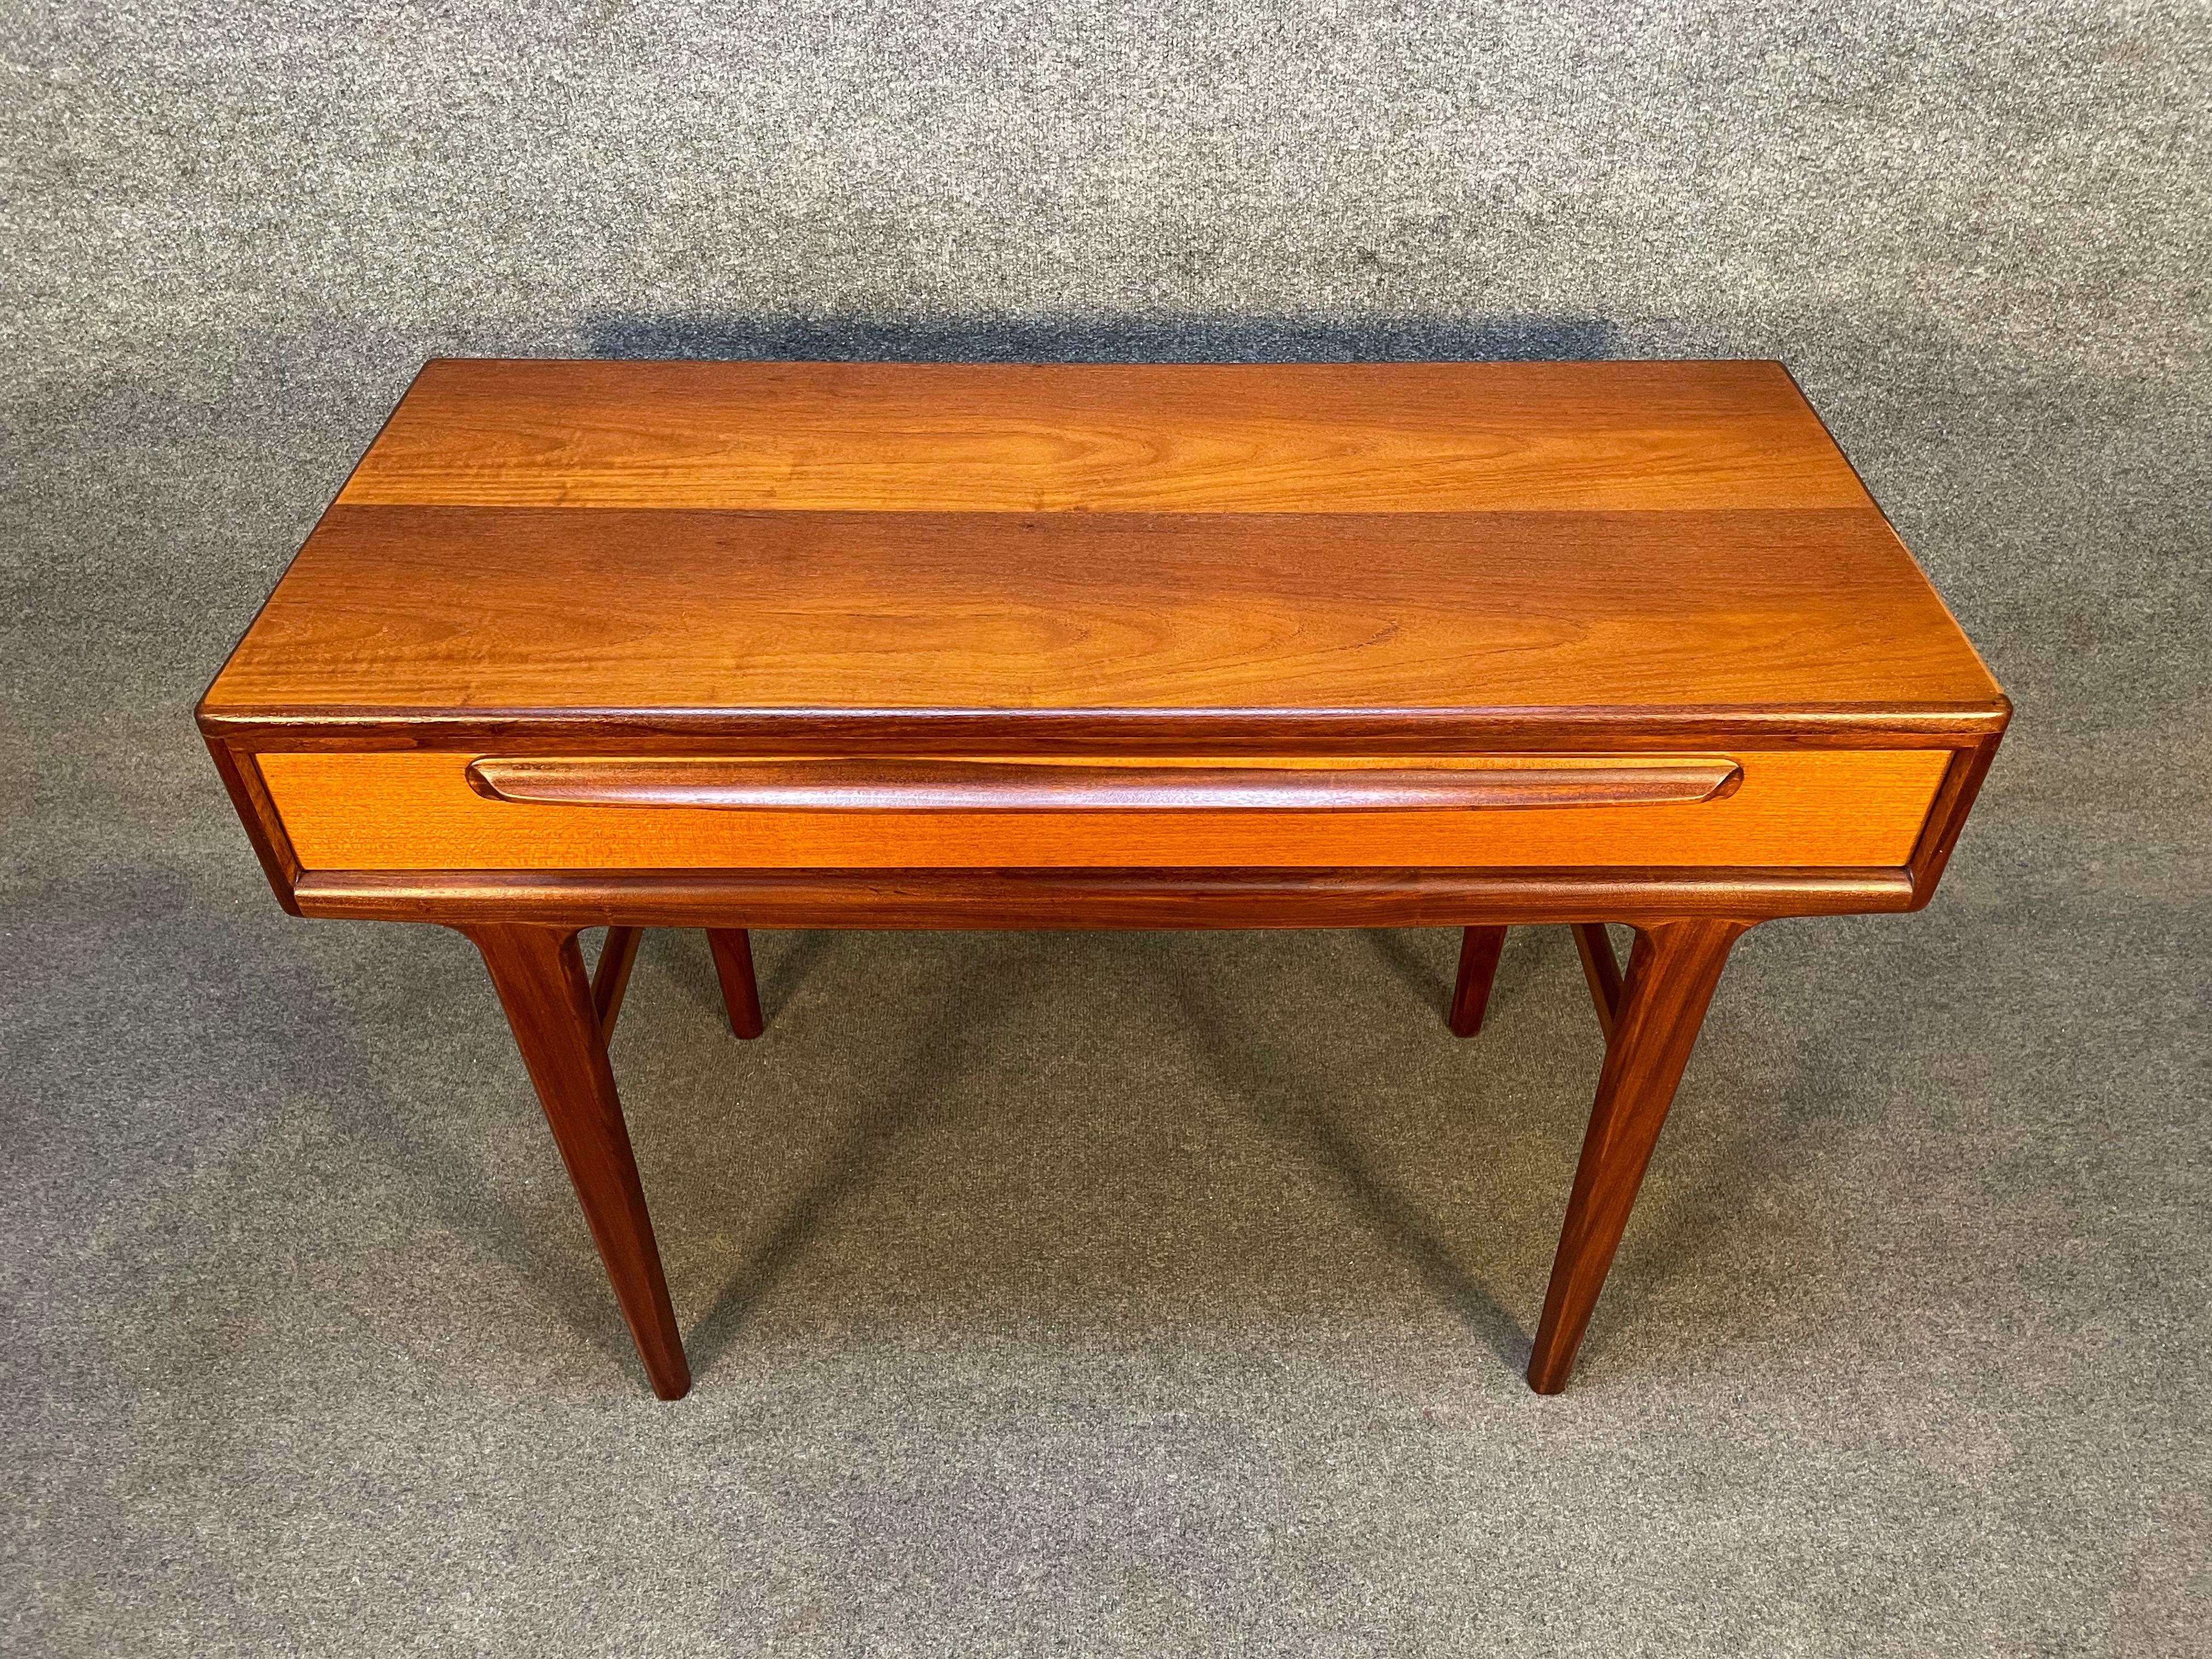 Here is a beautiful British Mid-Century Modern teak entry way console table from the 